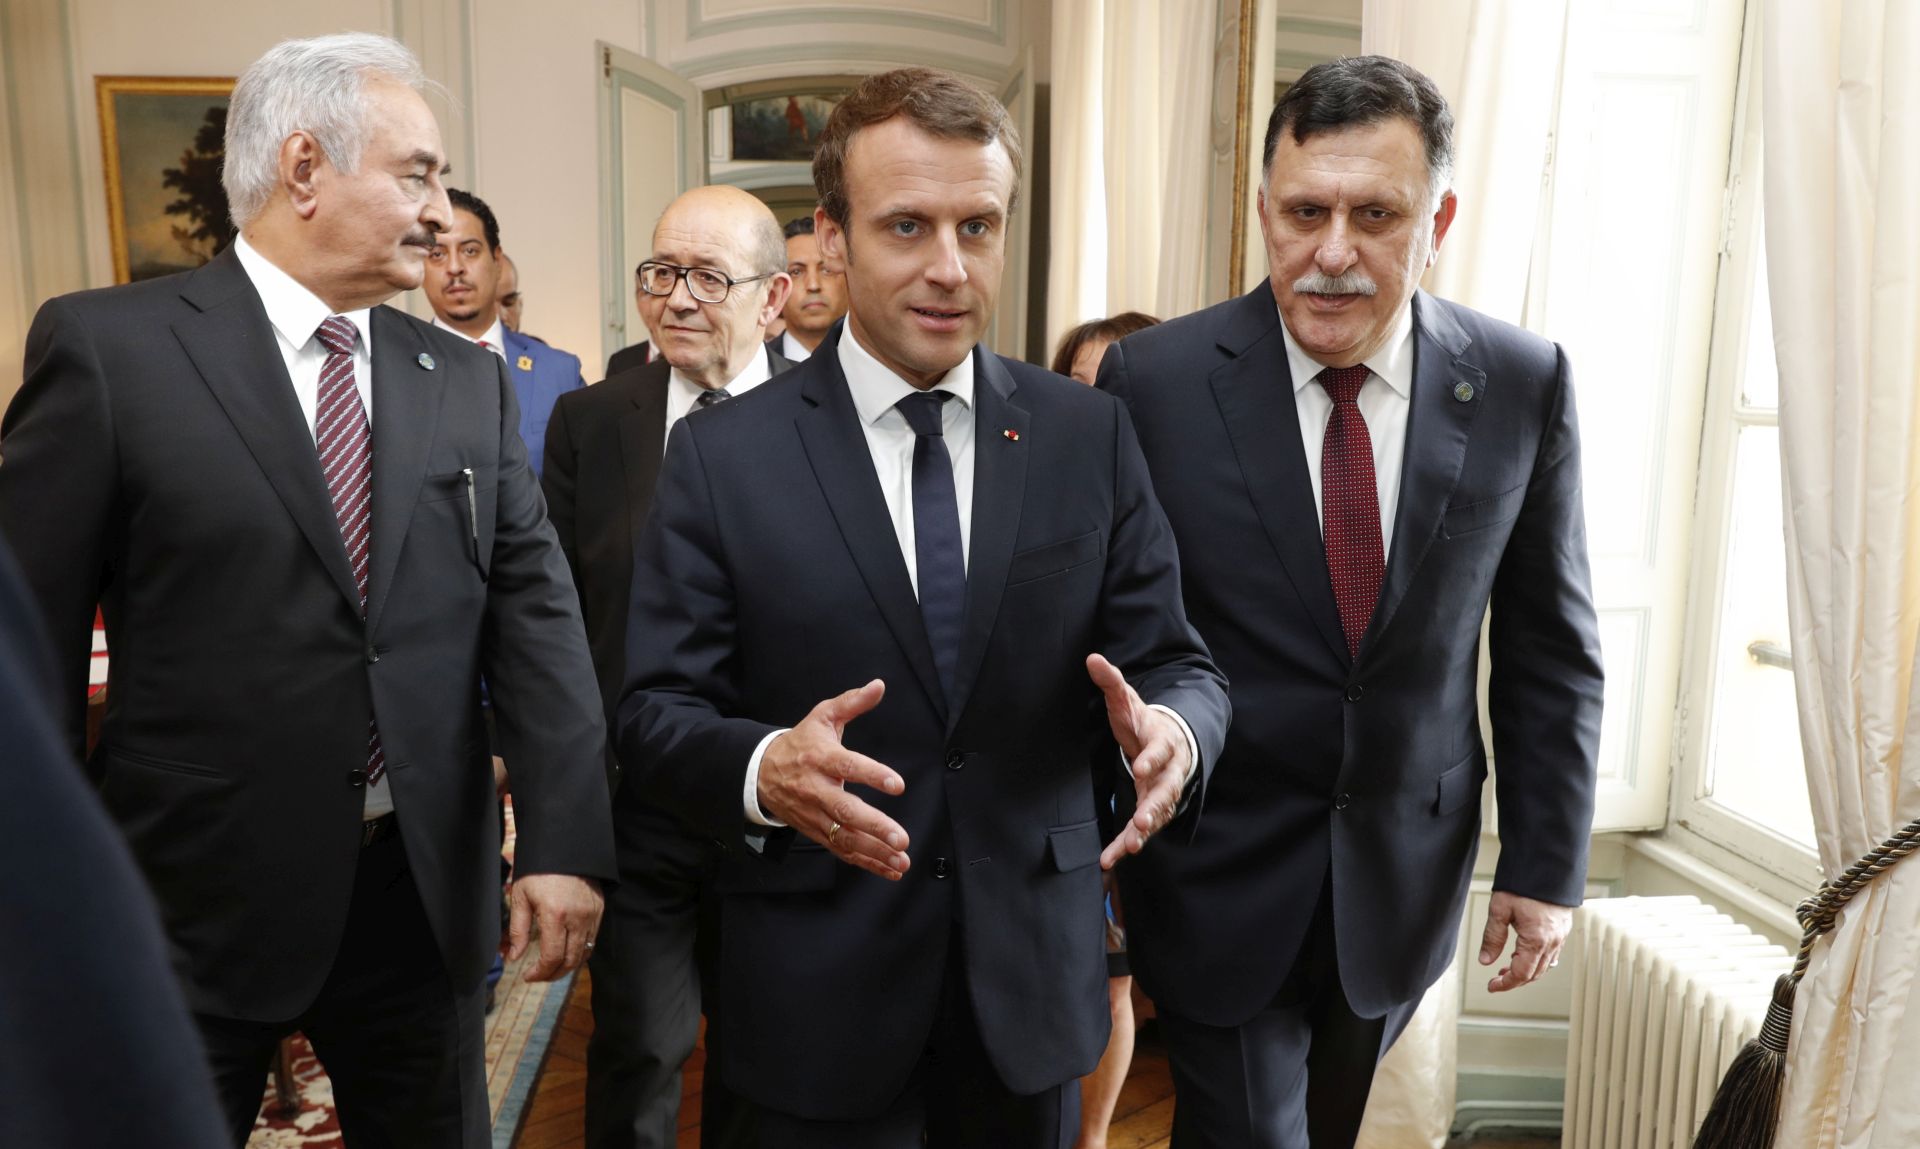 epa06108791 French President Emmanuel Macron (C) walks with Libyan Prime Minister Fayez al-Sarraj (R), General Khalifa Haftar (L), commander in the Libyan National Army (LNA), and French Europe and Foreign Minister Jean-Yves Le Drian (2ndL) before a meeting for talks over a political deal to help end Libyas crisis in La Celle-Saint-Cloud near Paris, France, 25 July 2017.  EPA/PHILIPPE WOJAZER / POOL MAXPPP OUT